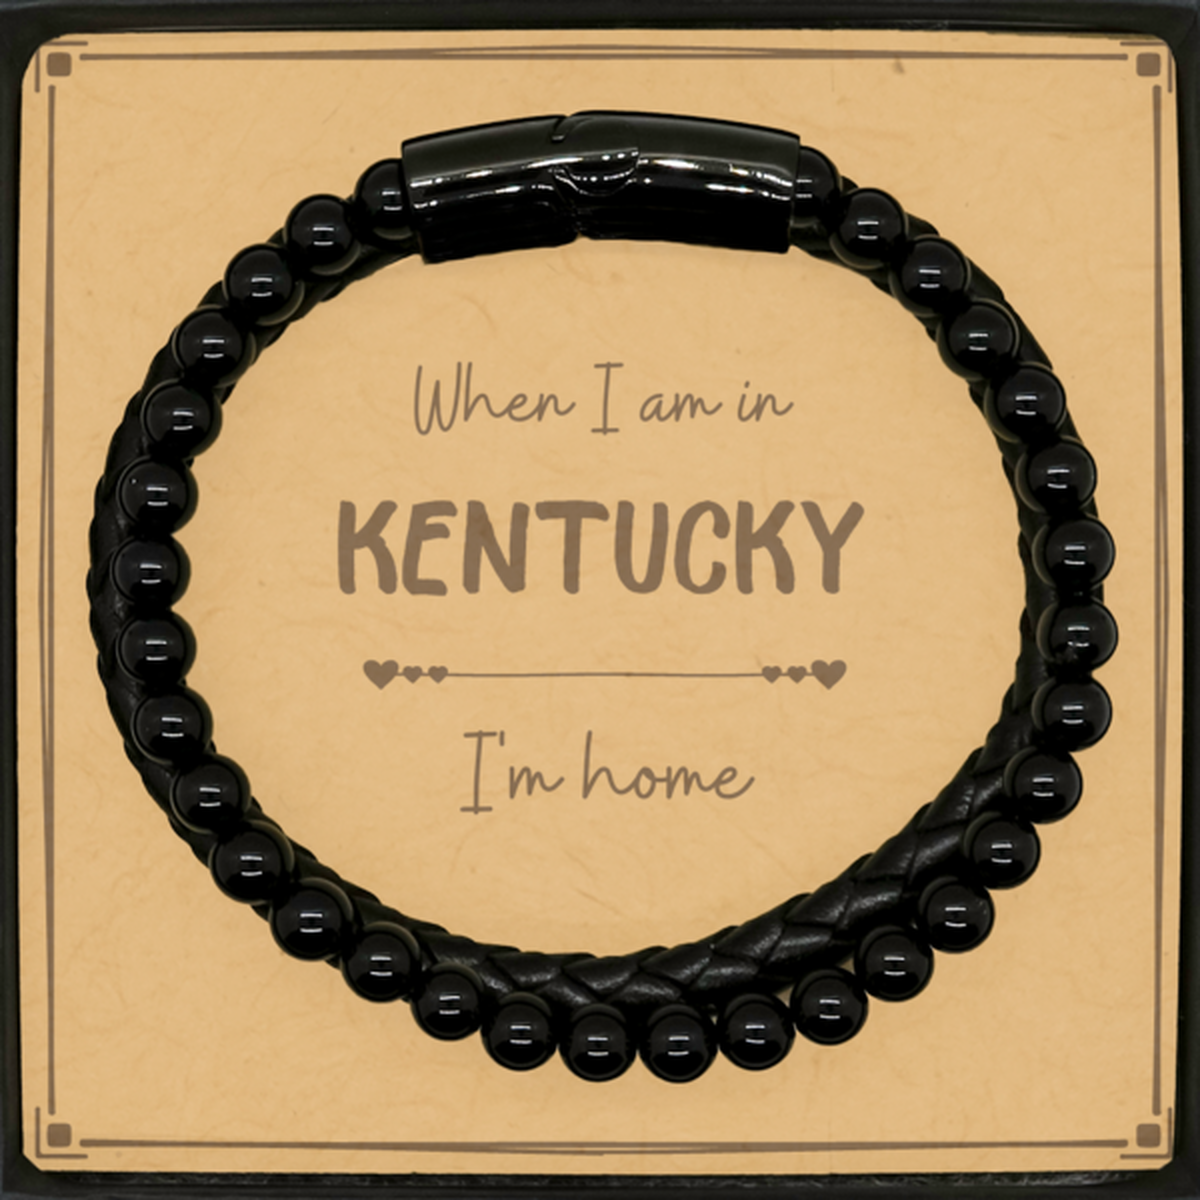 When I am in Kentucky I'm home Stone Leather Bracelets, Message Card Gifts For Kentucky, State Kentucky Birthday Gifts for Friends Coworker